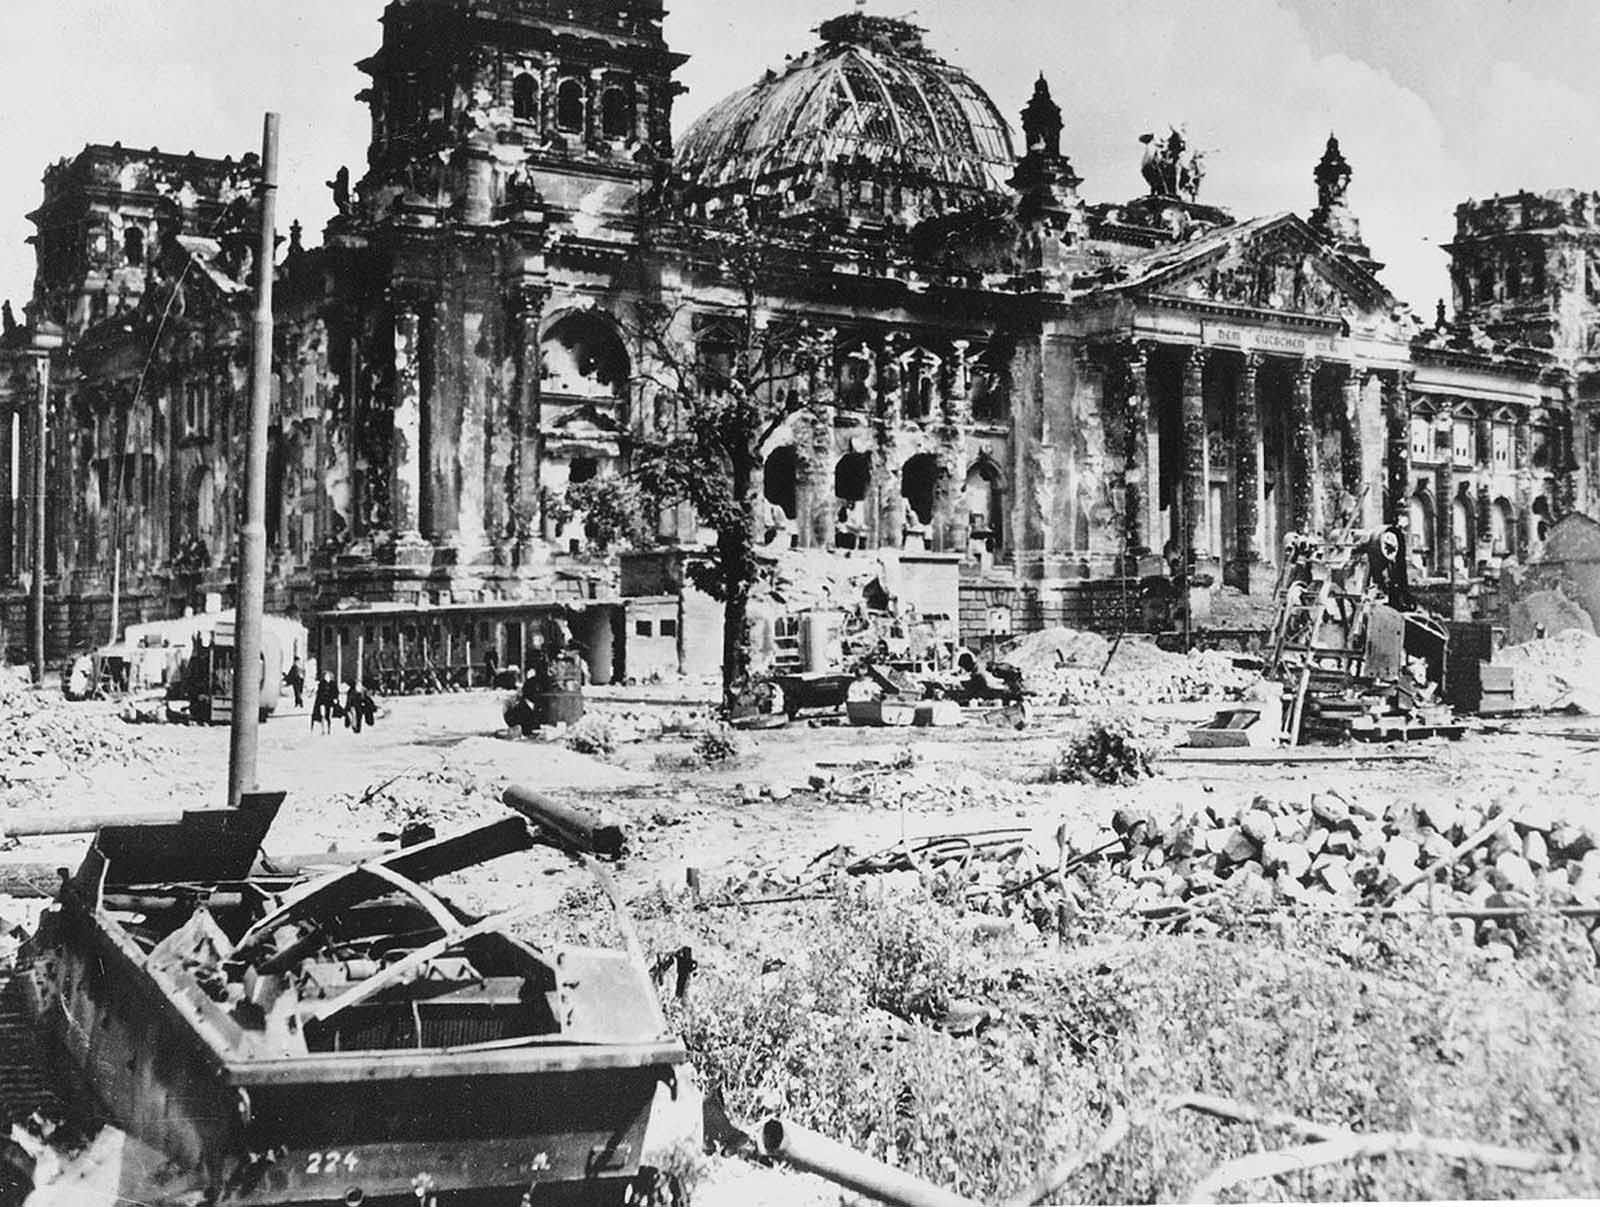 The wrecked Reichstag building in Berlin, Germany, with a destroyed German military vehicle in the foreground, at the end of World War II.